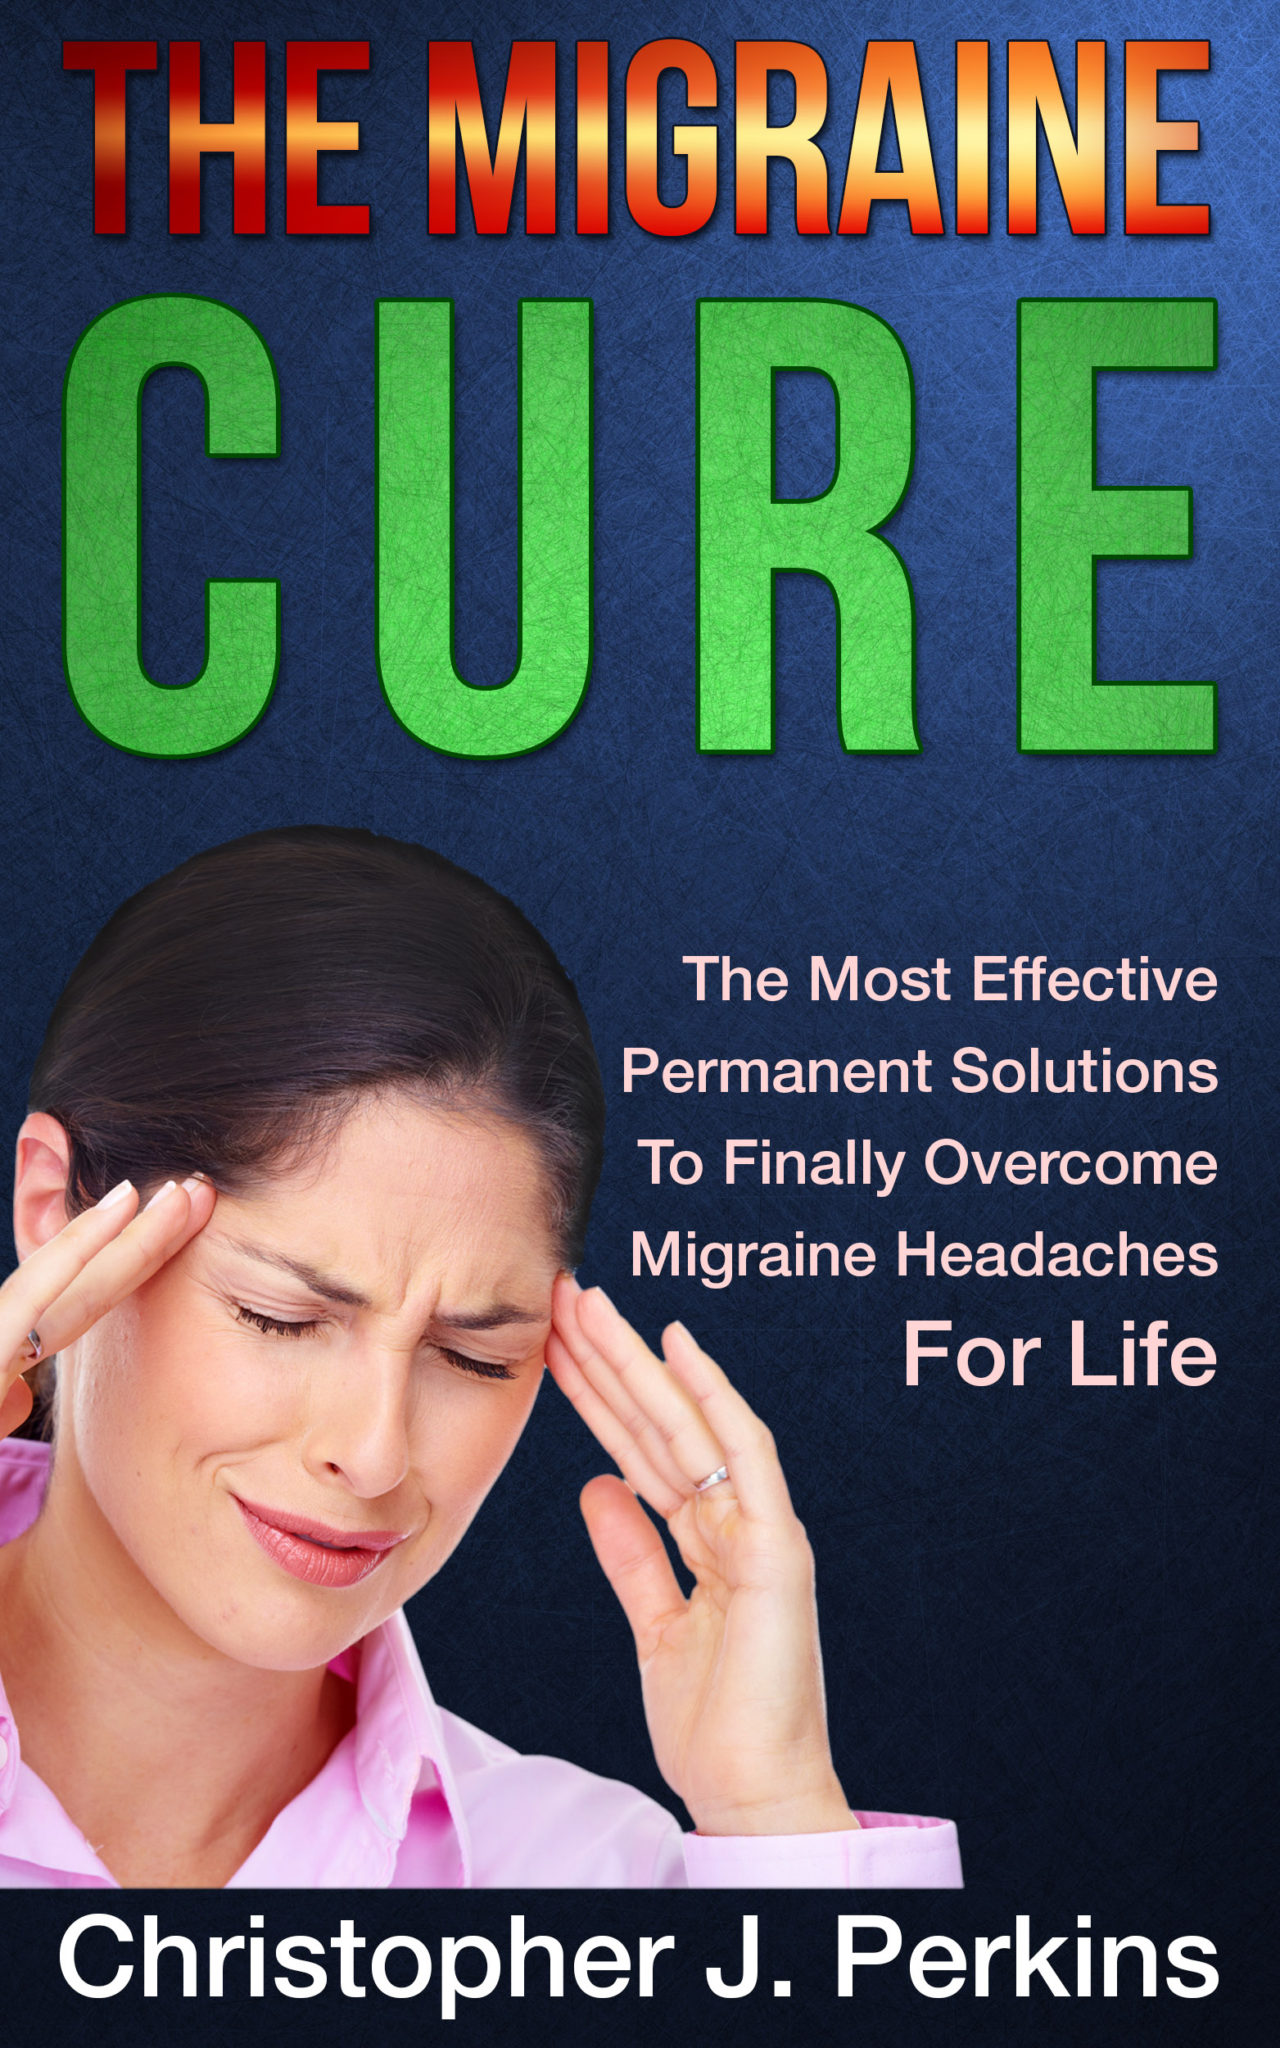 The Migraine Cure – The Most Effective Permanent Solutions To Finally Overcome Migraine Headaches For Life by Christopher J. Perkins